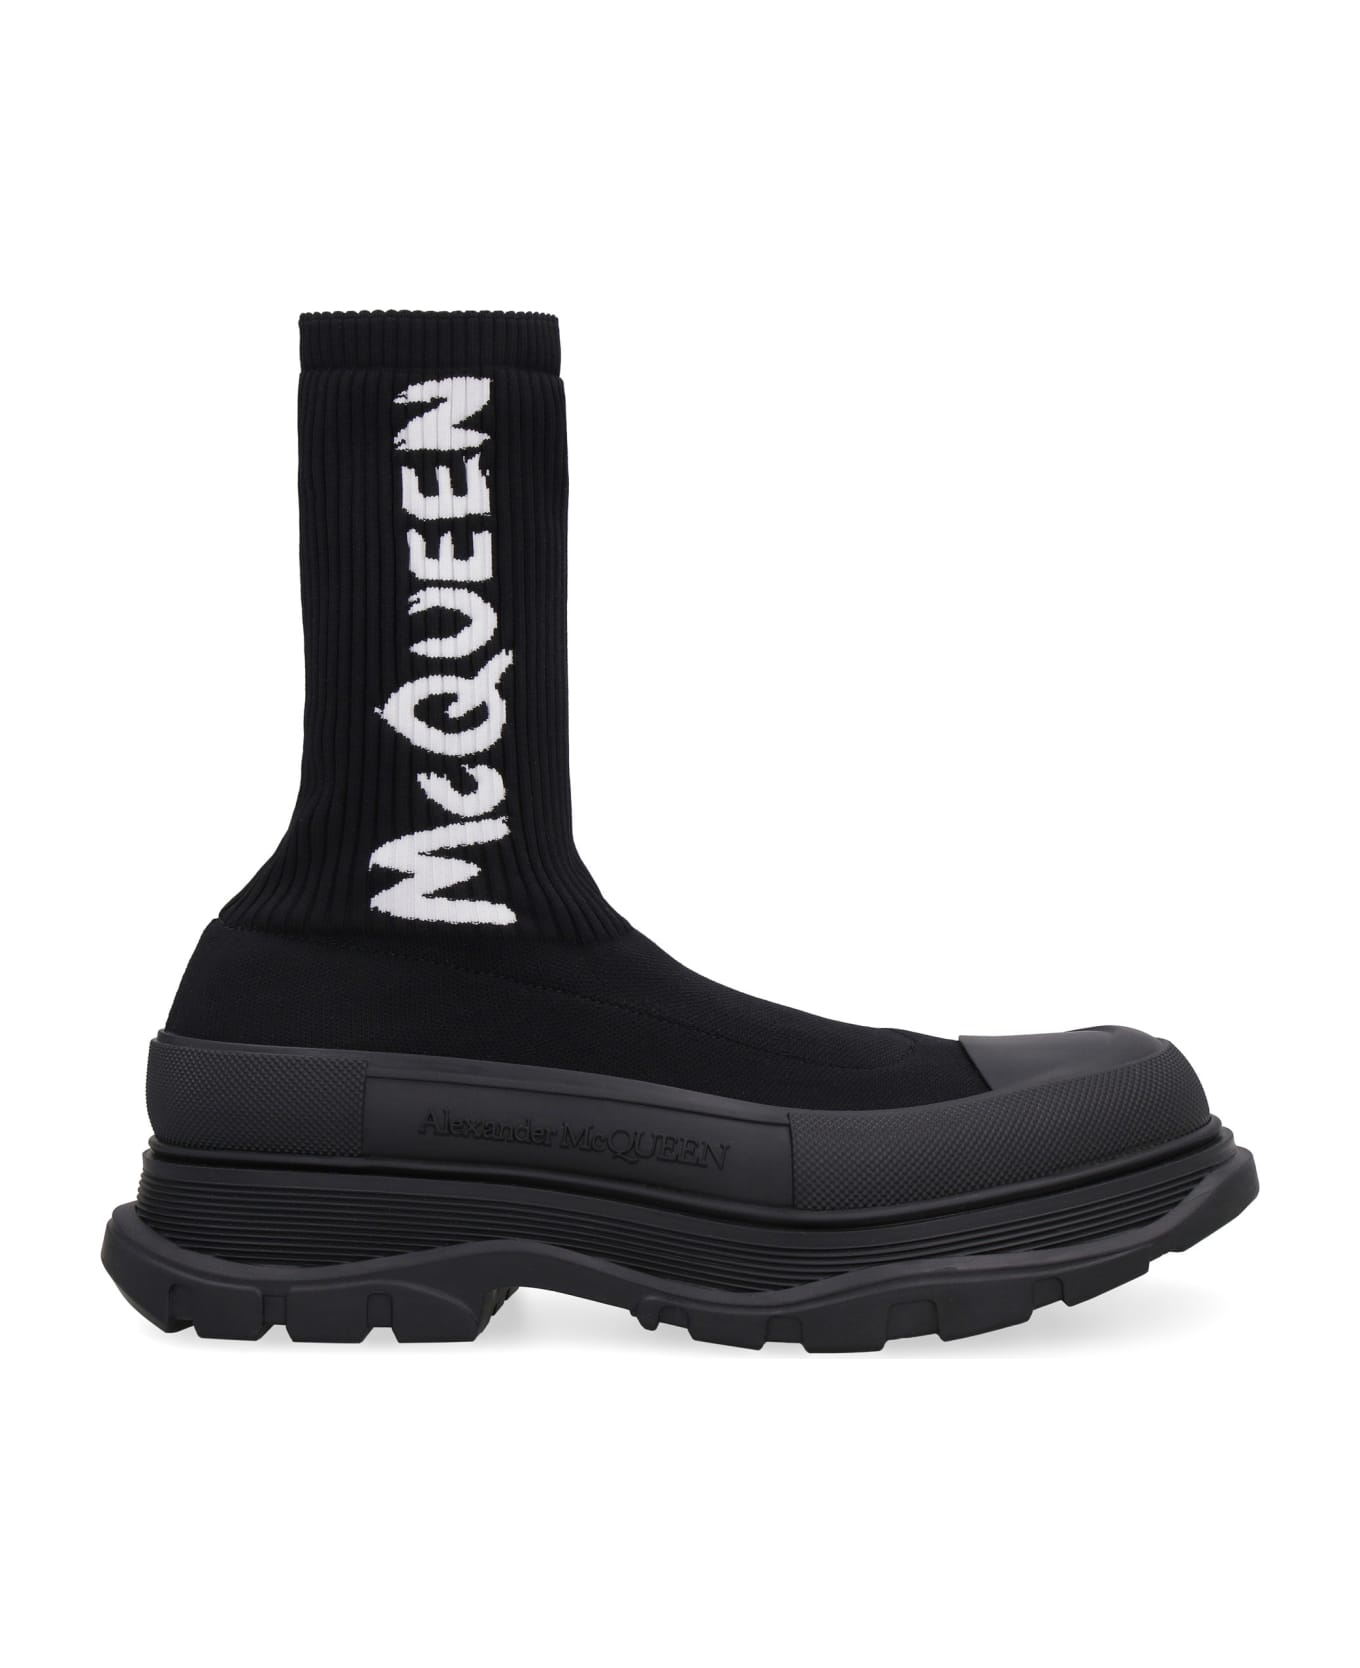 Alexander McQueen Tread Slick Knitted Ankle Boots - Nero